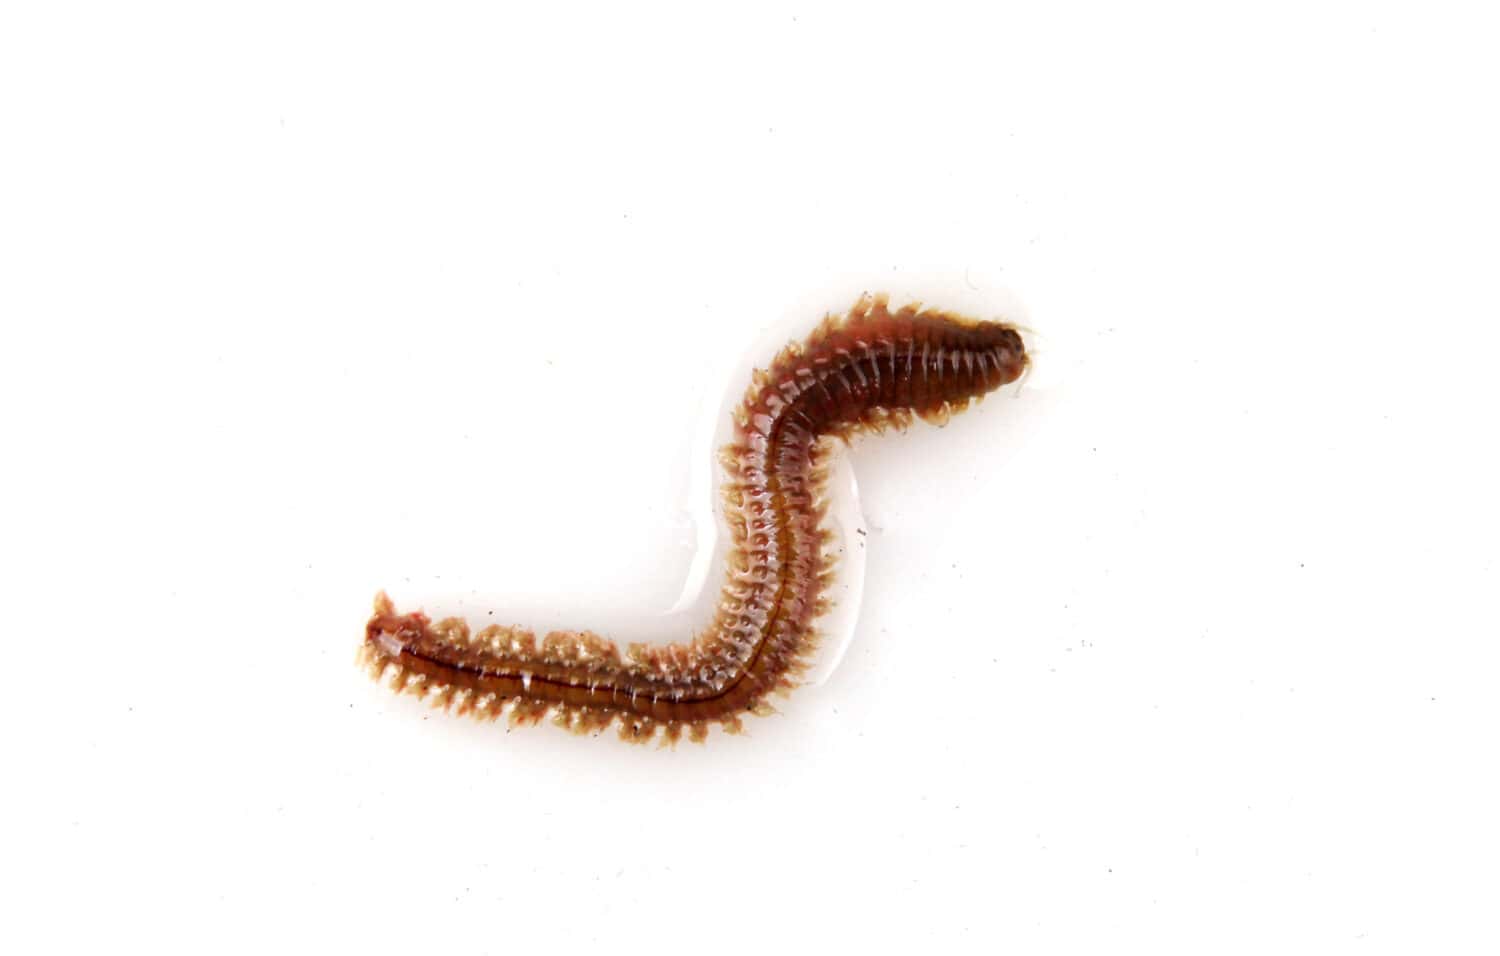 Close-Up Of Clam Worm Against White Background